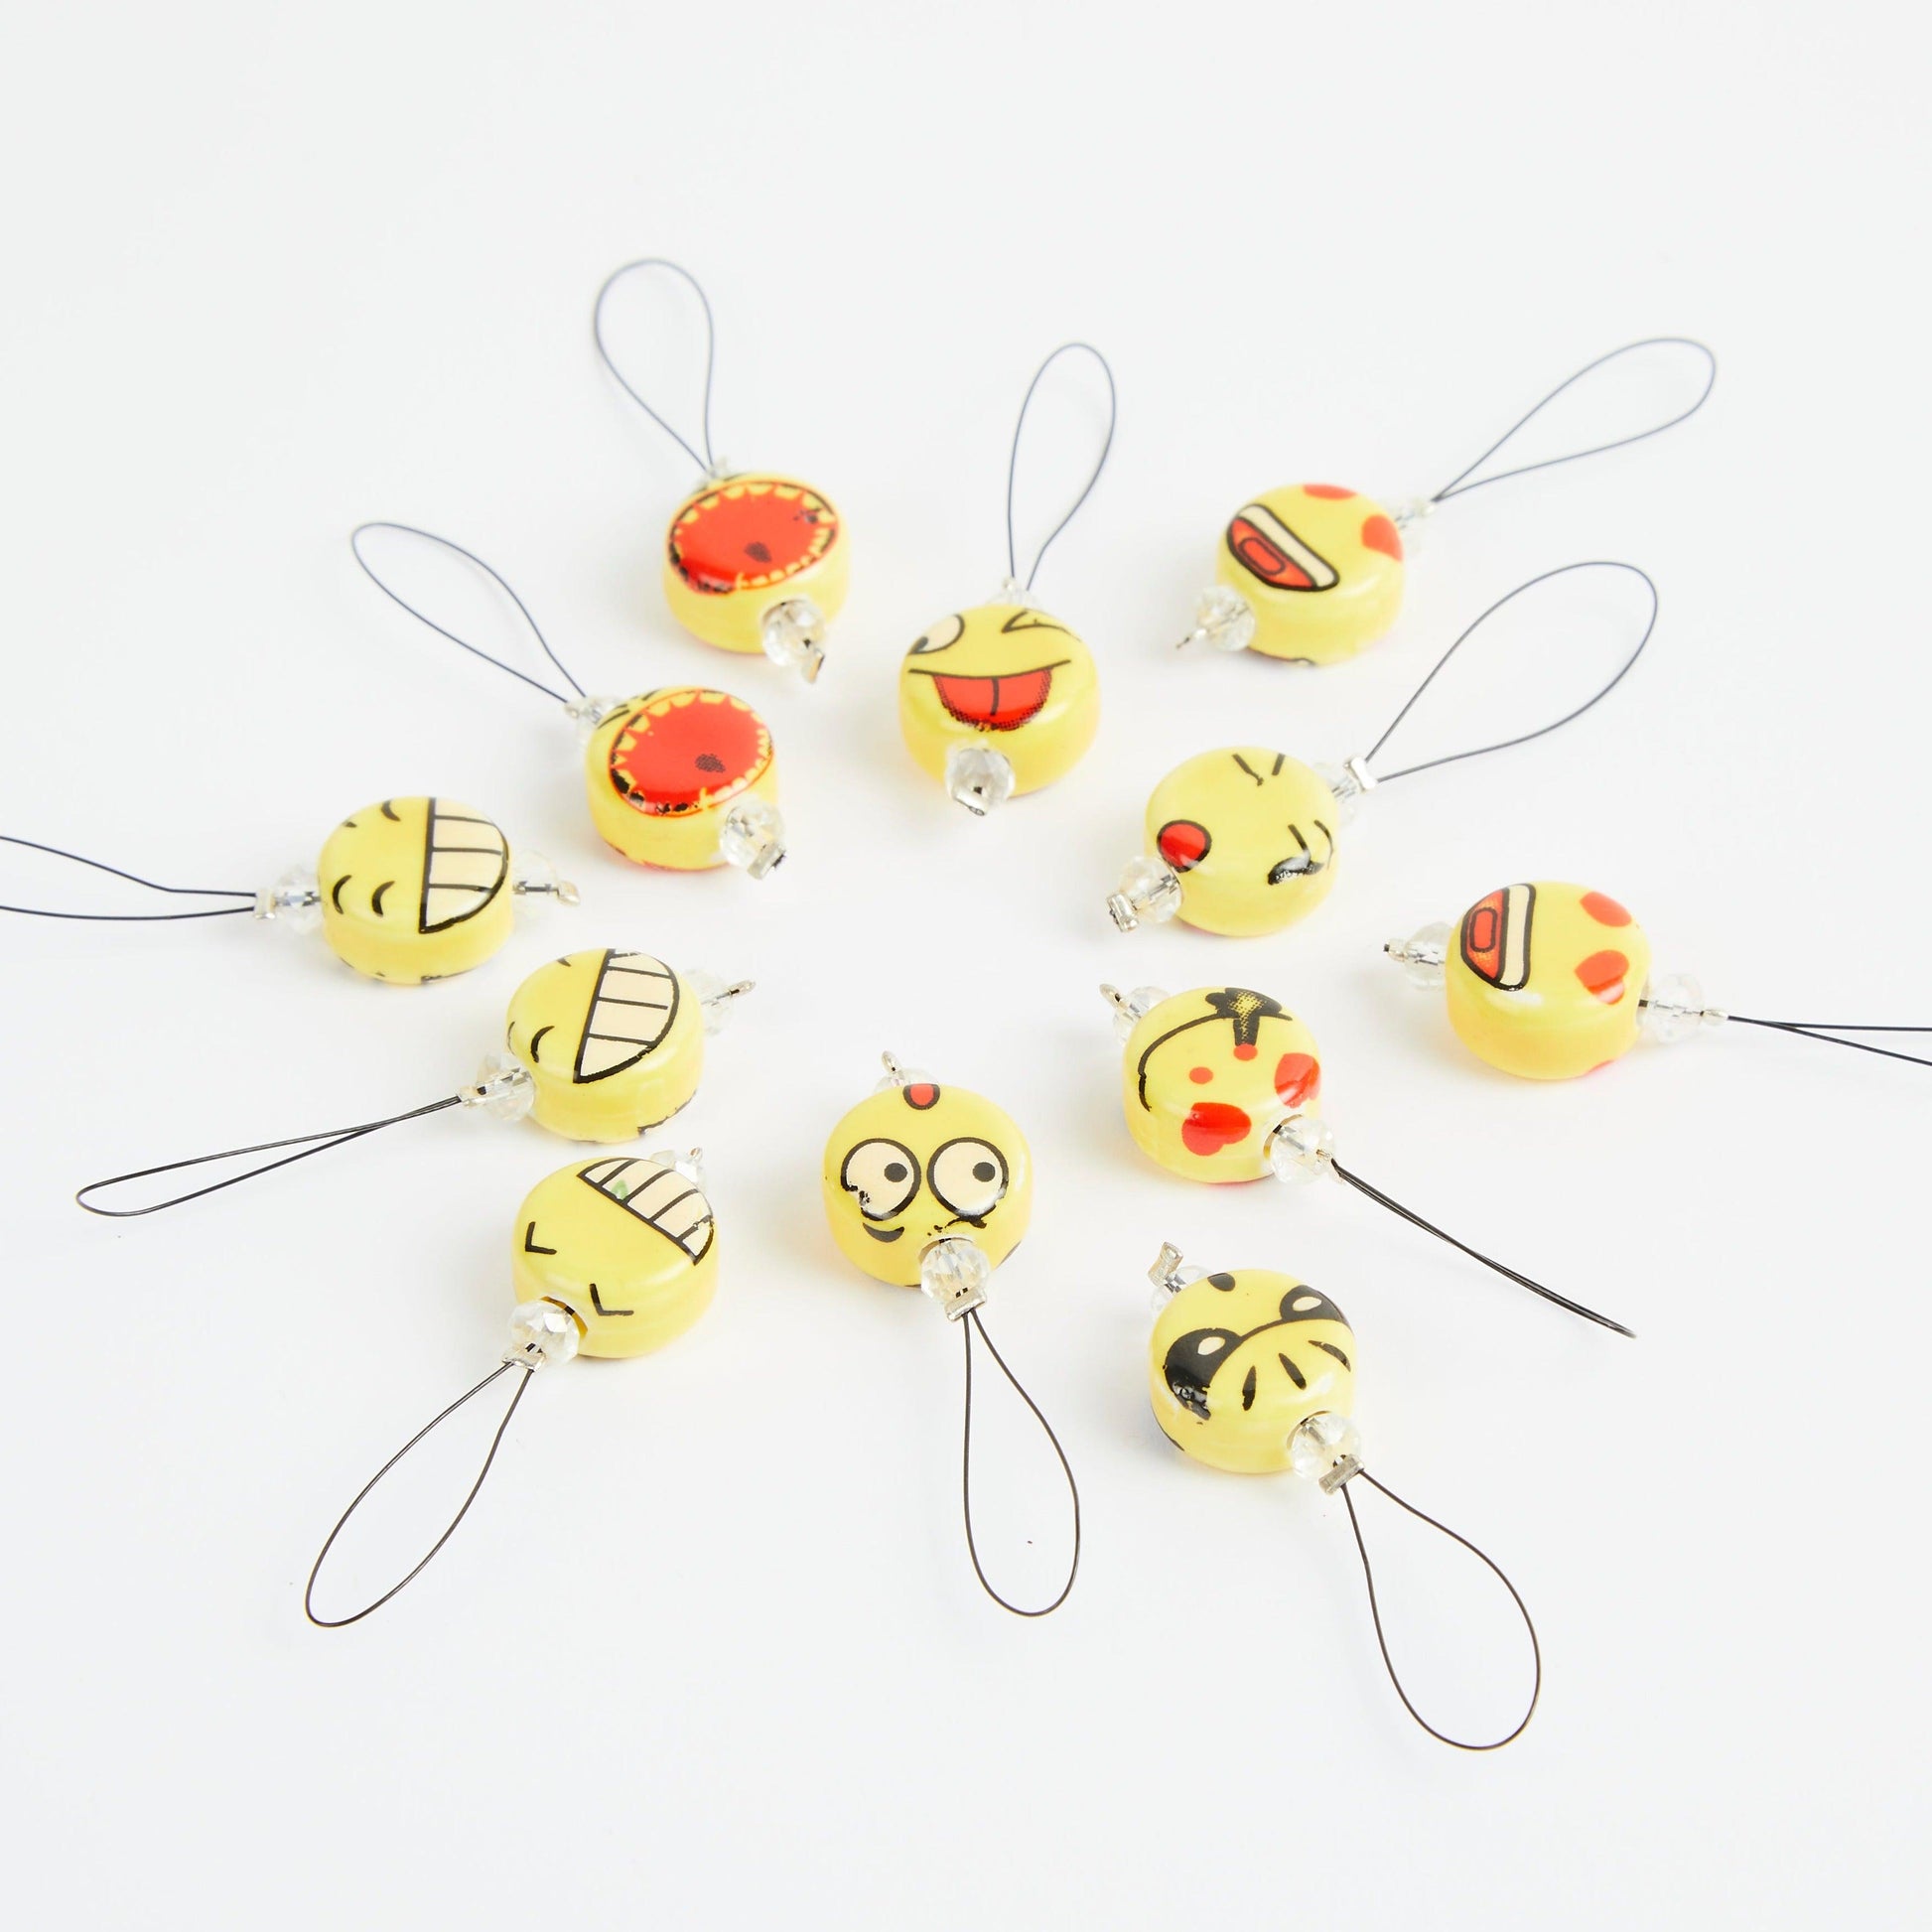 KnitPro NEW ZOONI Stitch Markers in Playful Beads "Smileys" (11251) - Leo Hobby